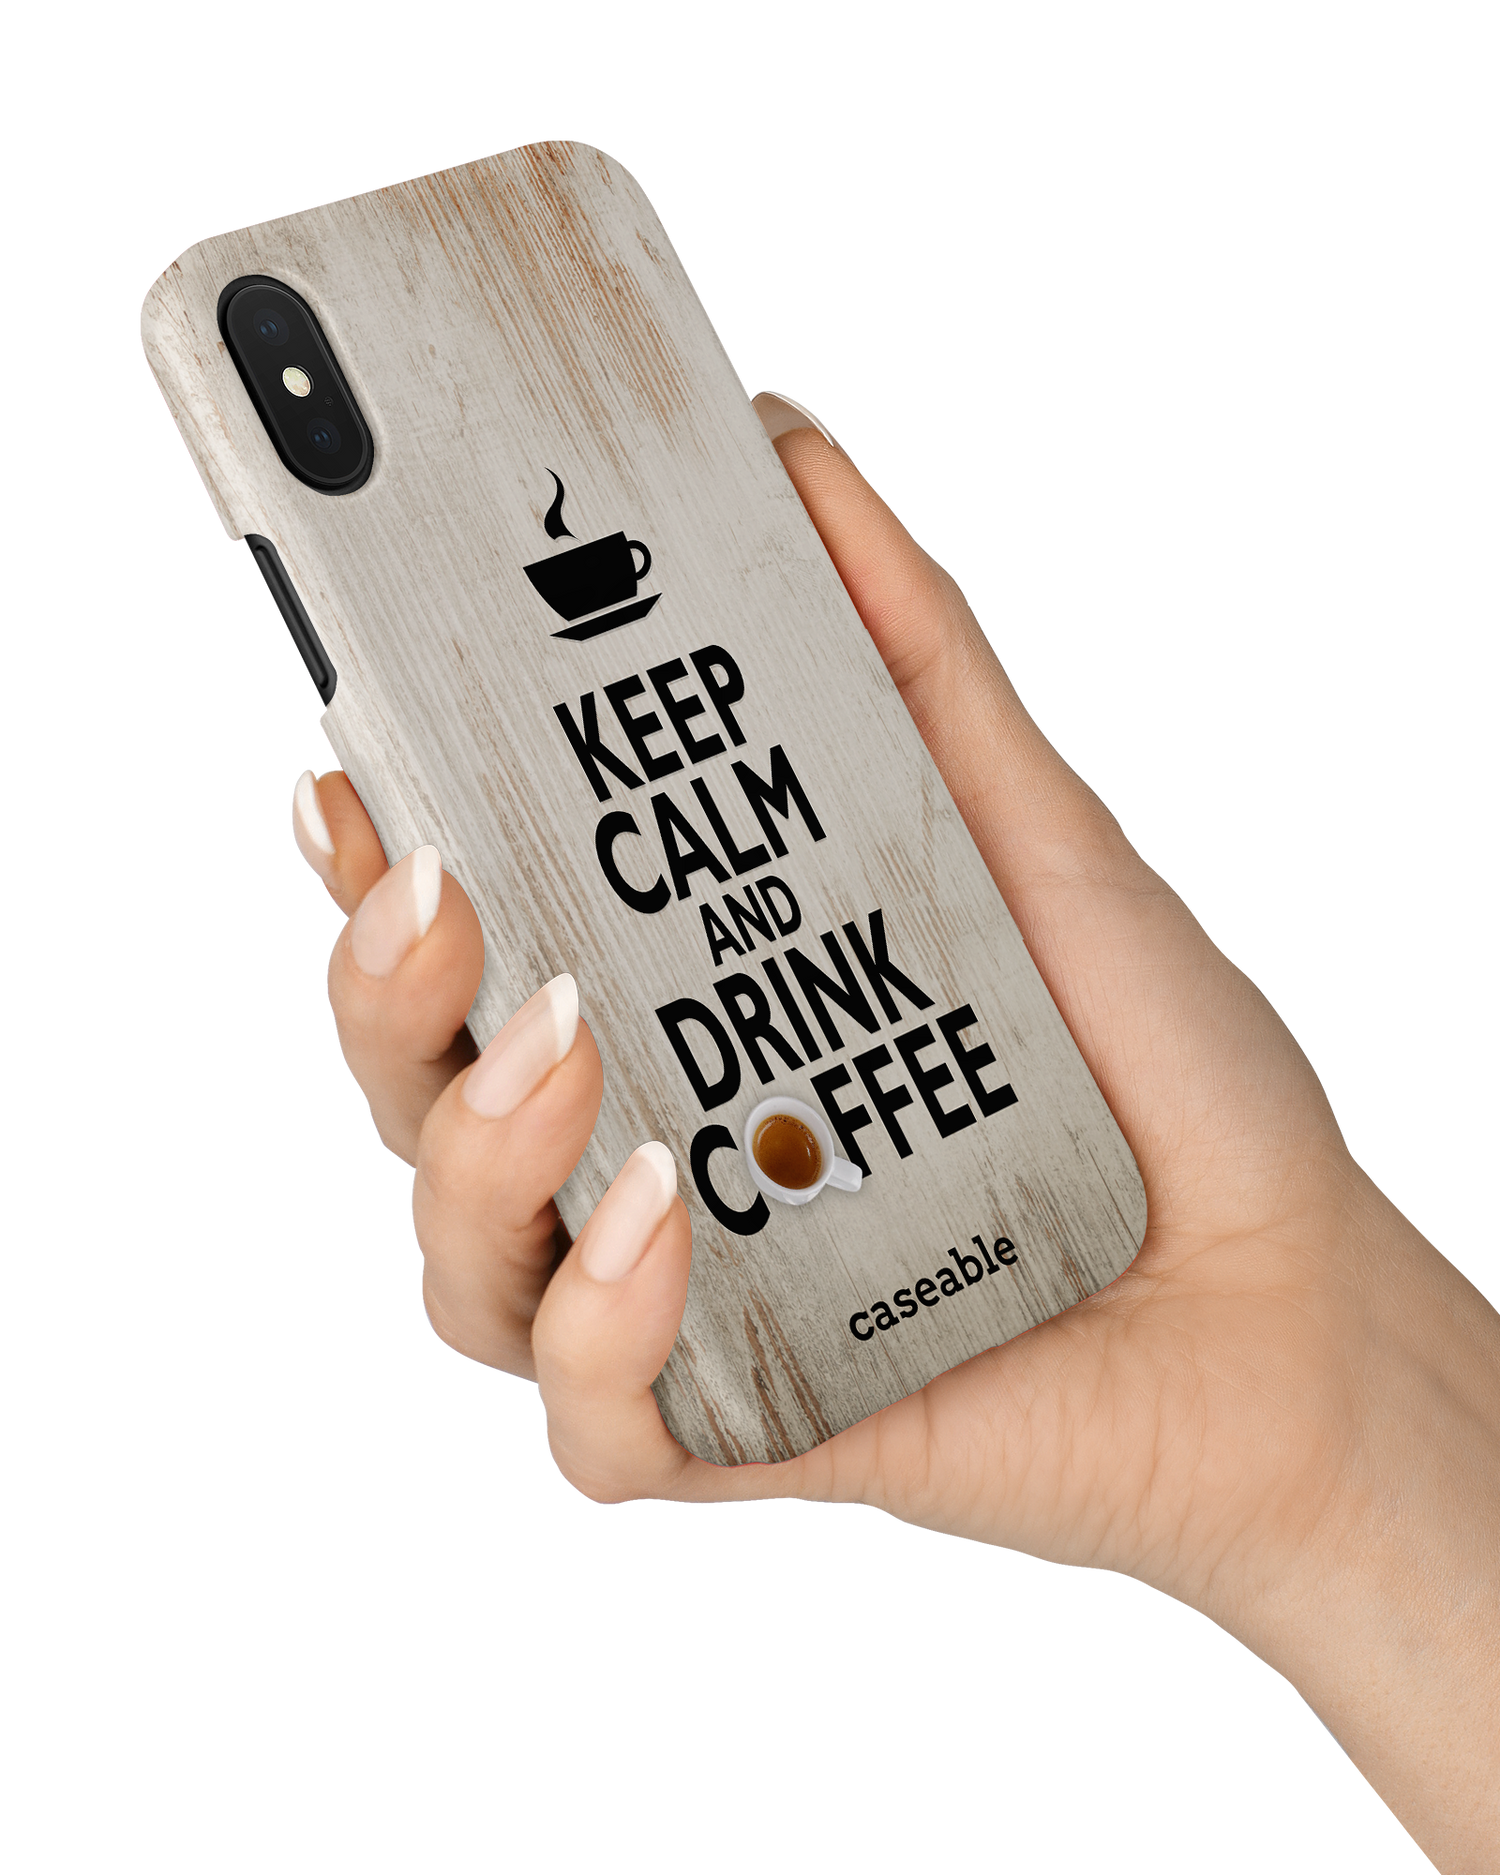 Drink Coffee Hard Shell Phone Case Apple iPhone X, Apple iPhone XS held in hand